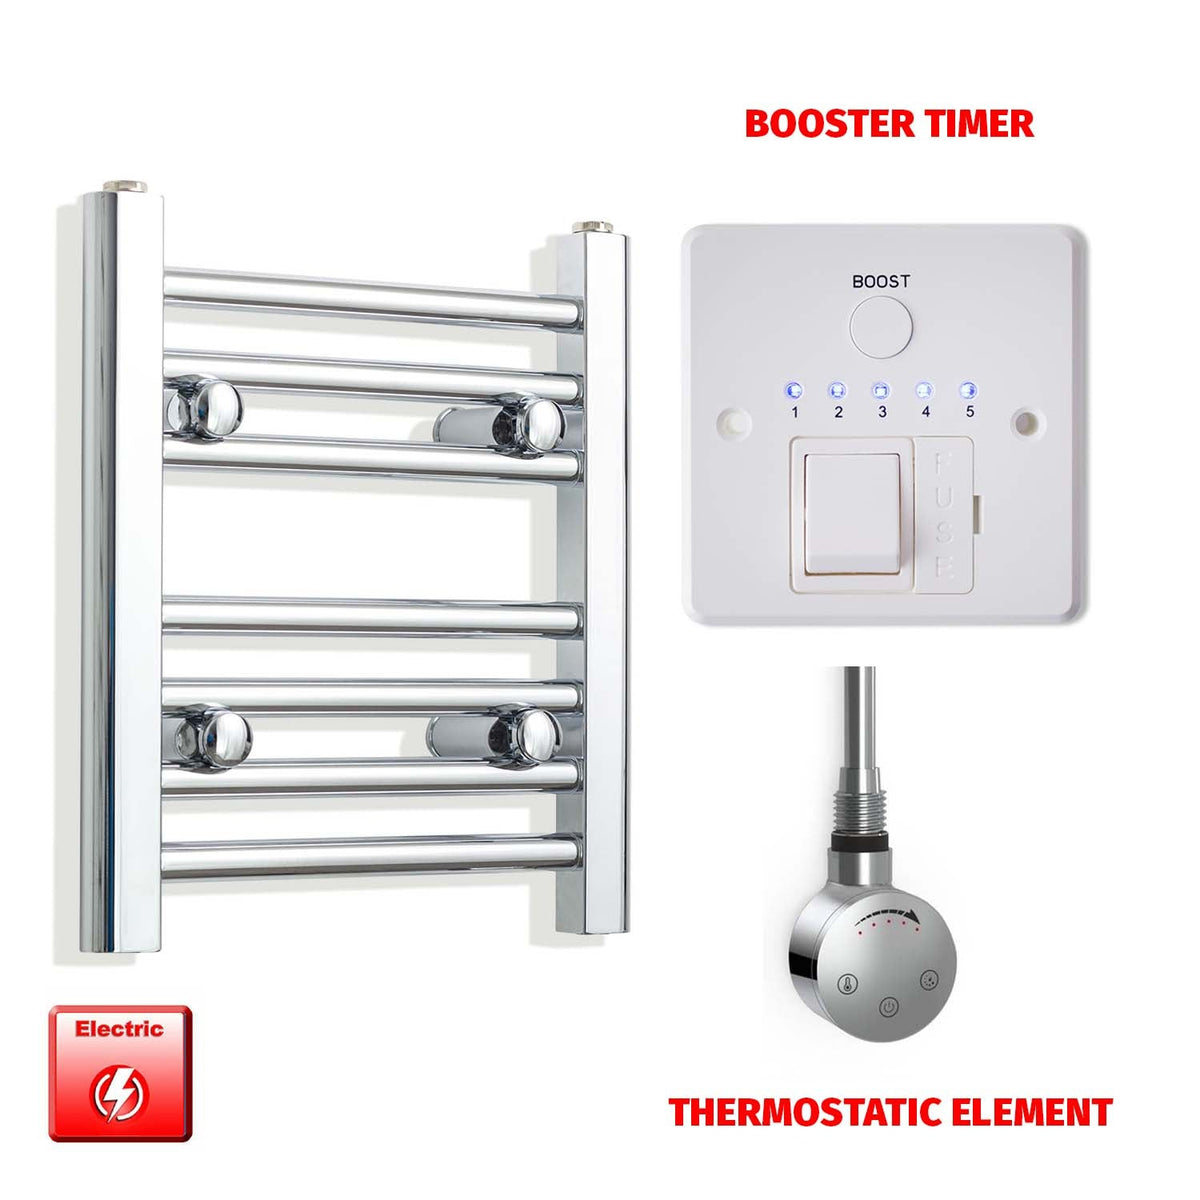 400mm High 350mm Wid Pre-Filled Electric Heated Towel Rail Radiator Straight Chrome SMR Thermostatic element Booster timer